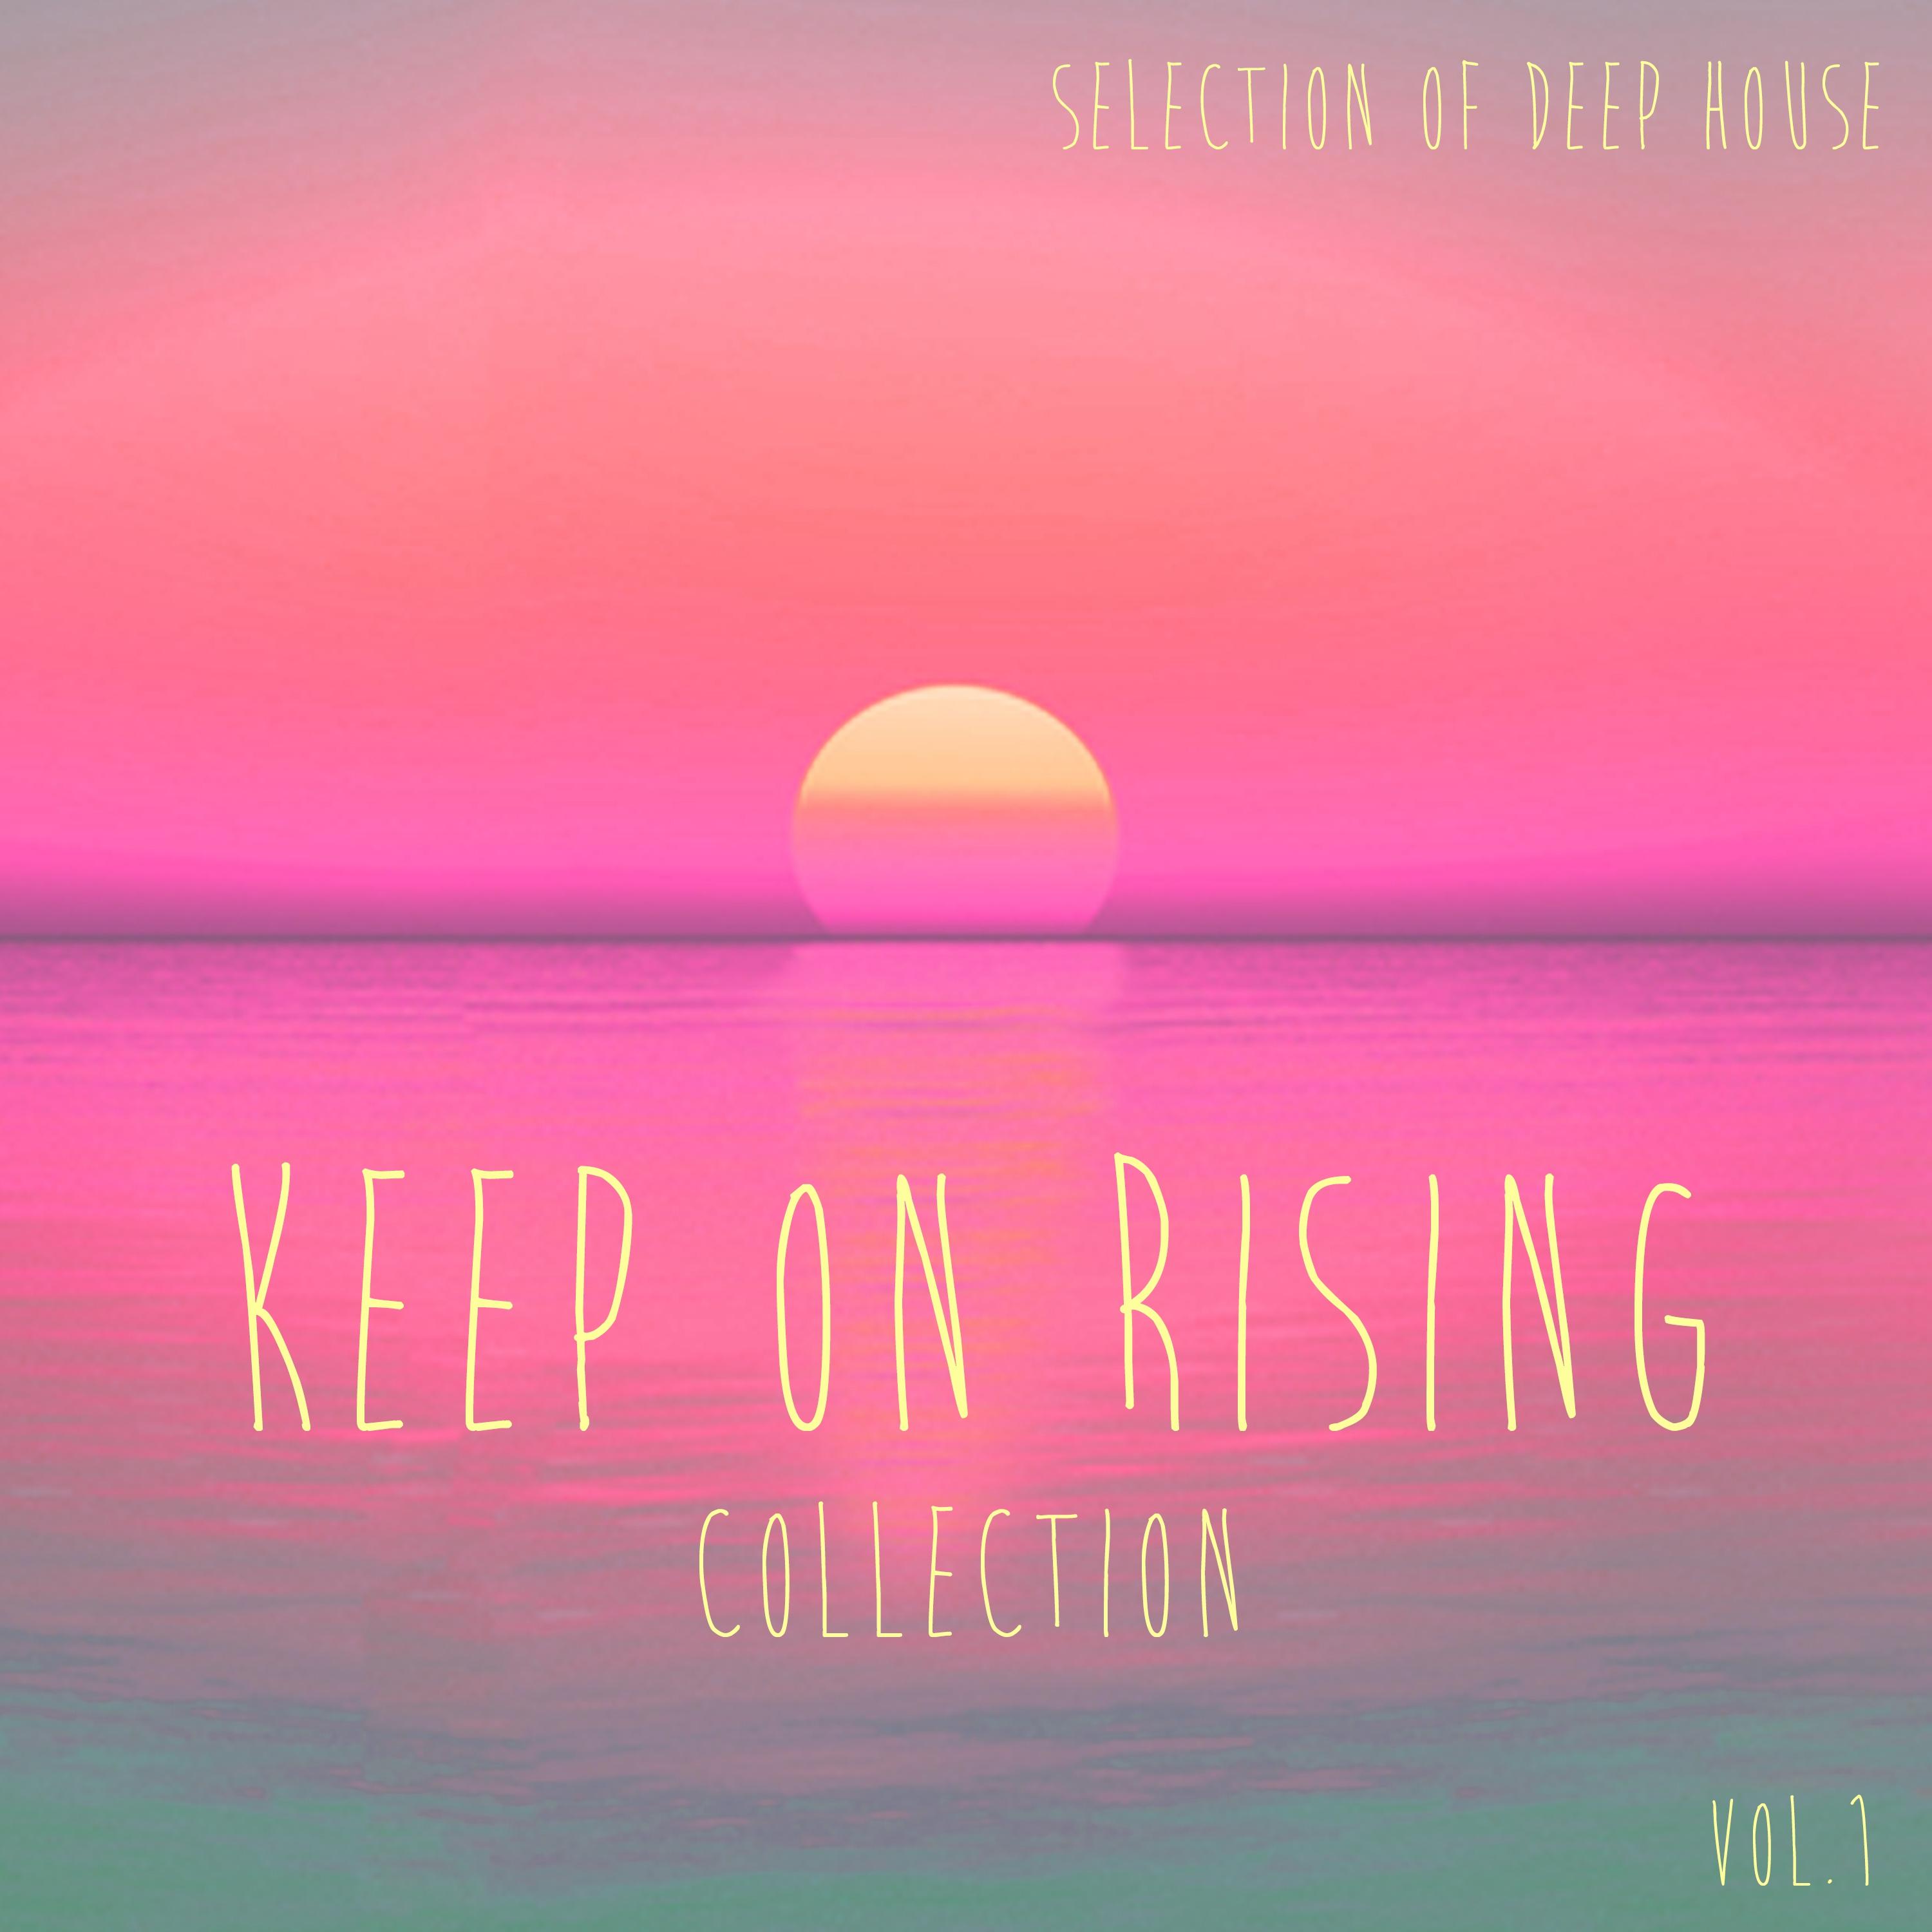 Keep On Rising, Vol. 1 - Selection of Deep House